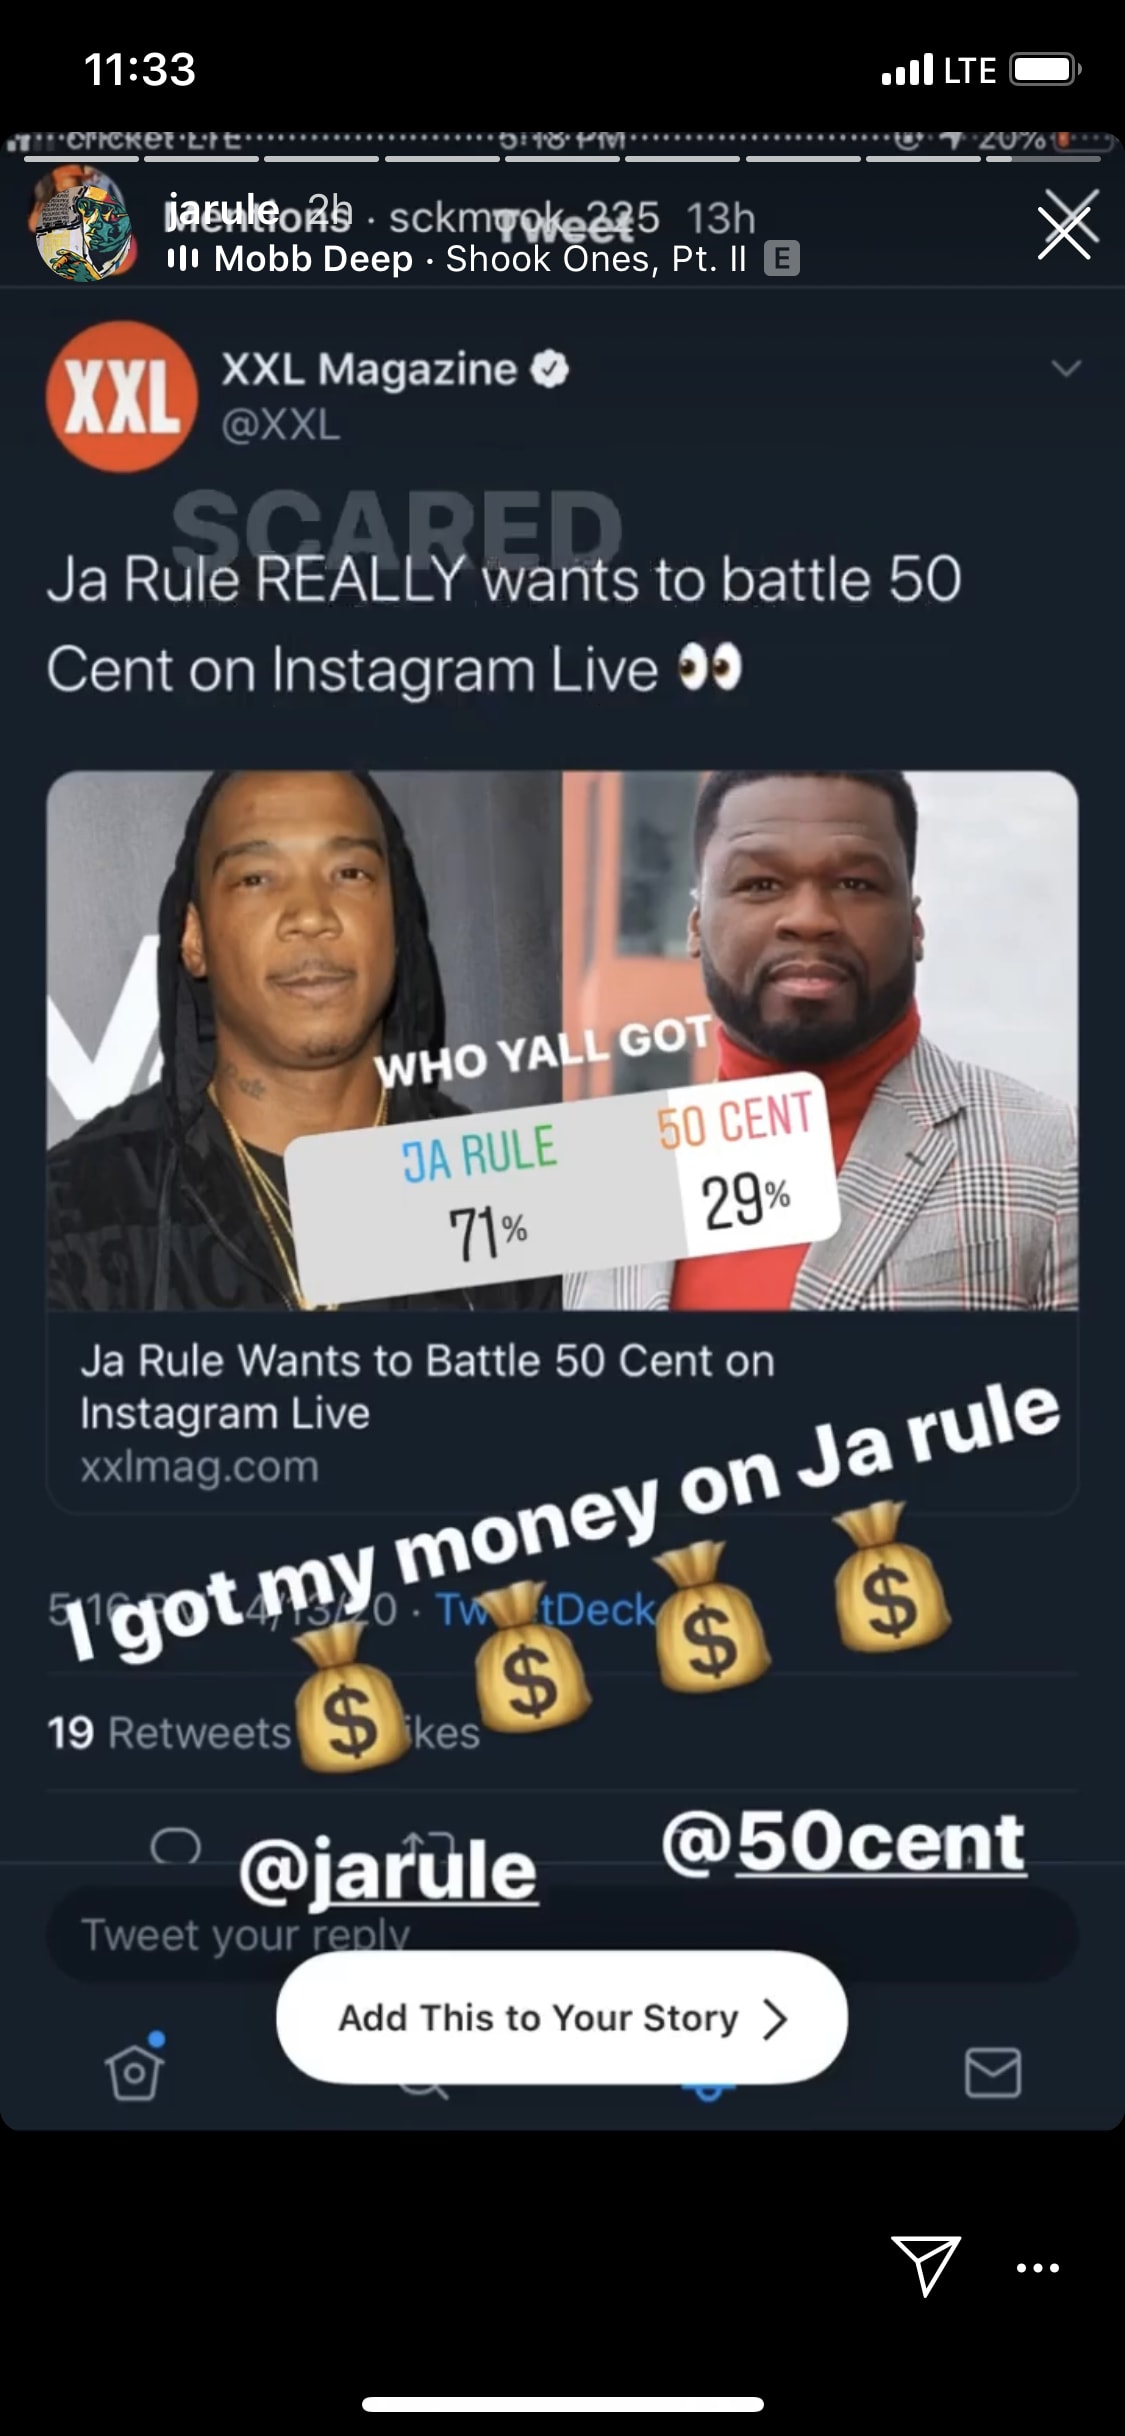 This is a photo of Ja Rule